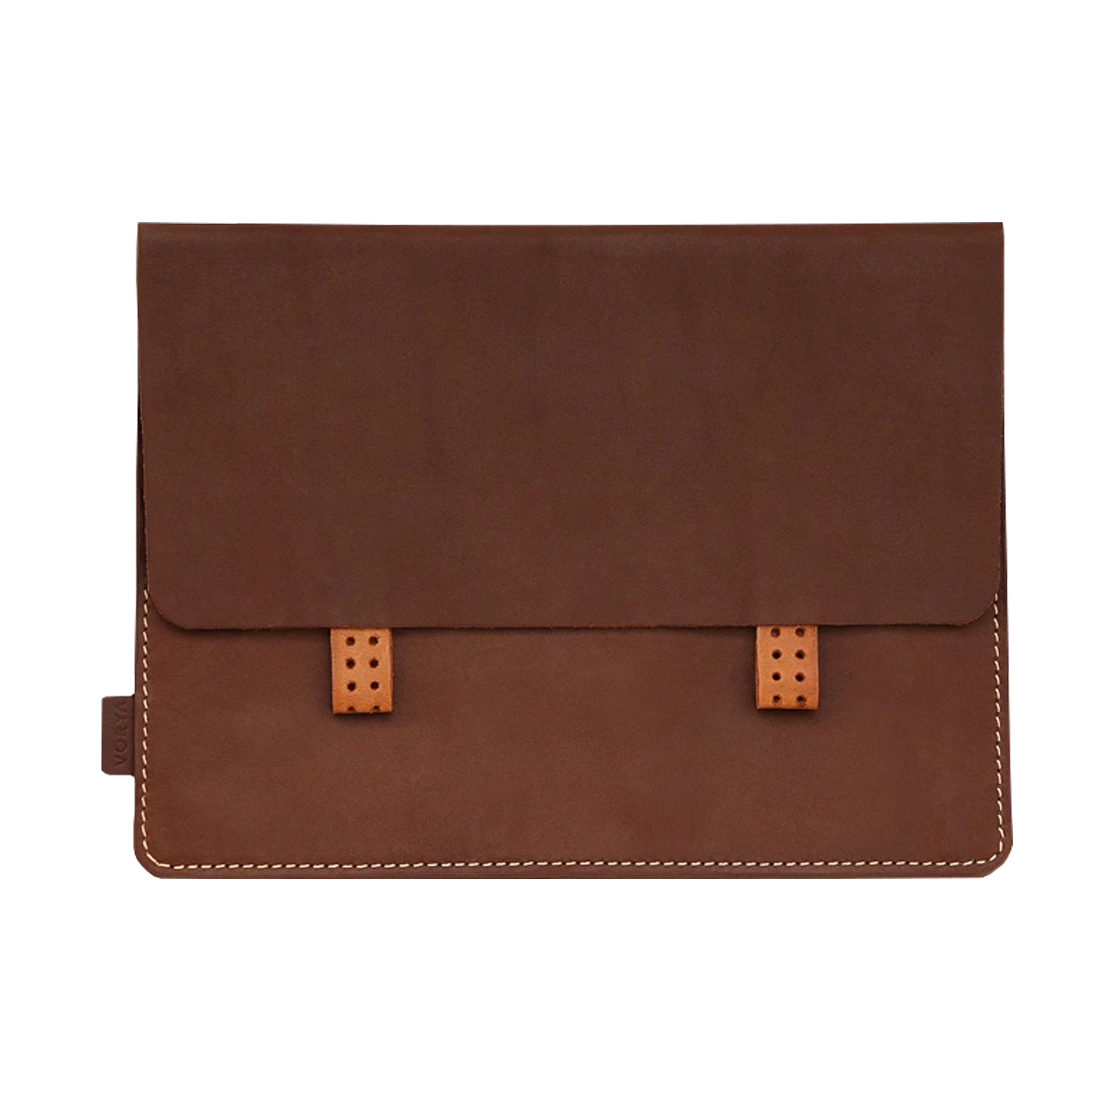 vorya-leather-pouch-cover-for-ipad-air-10-inch